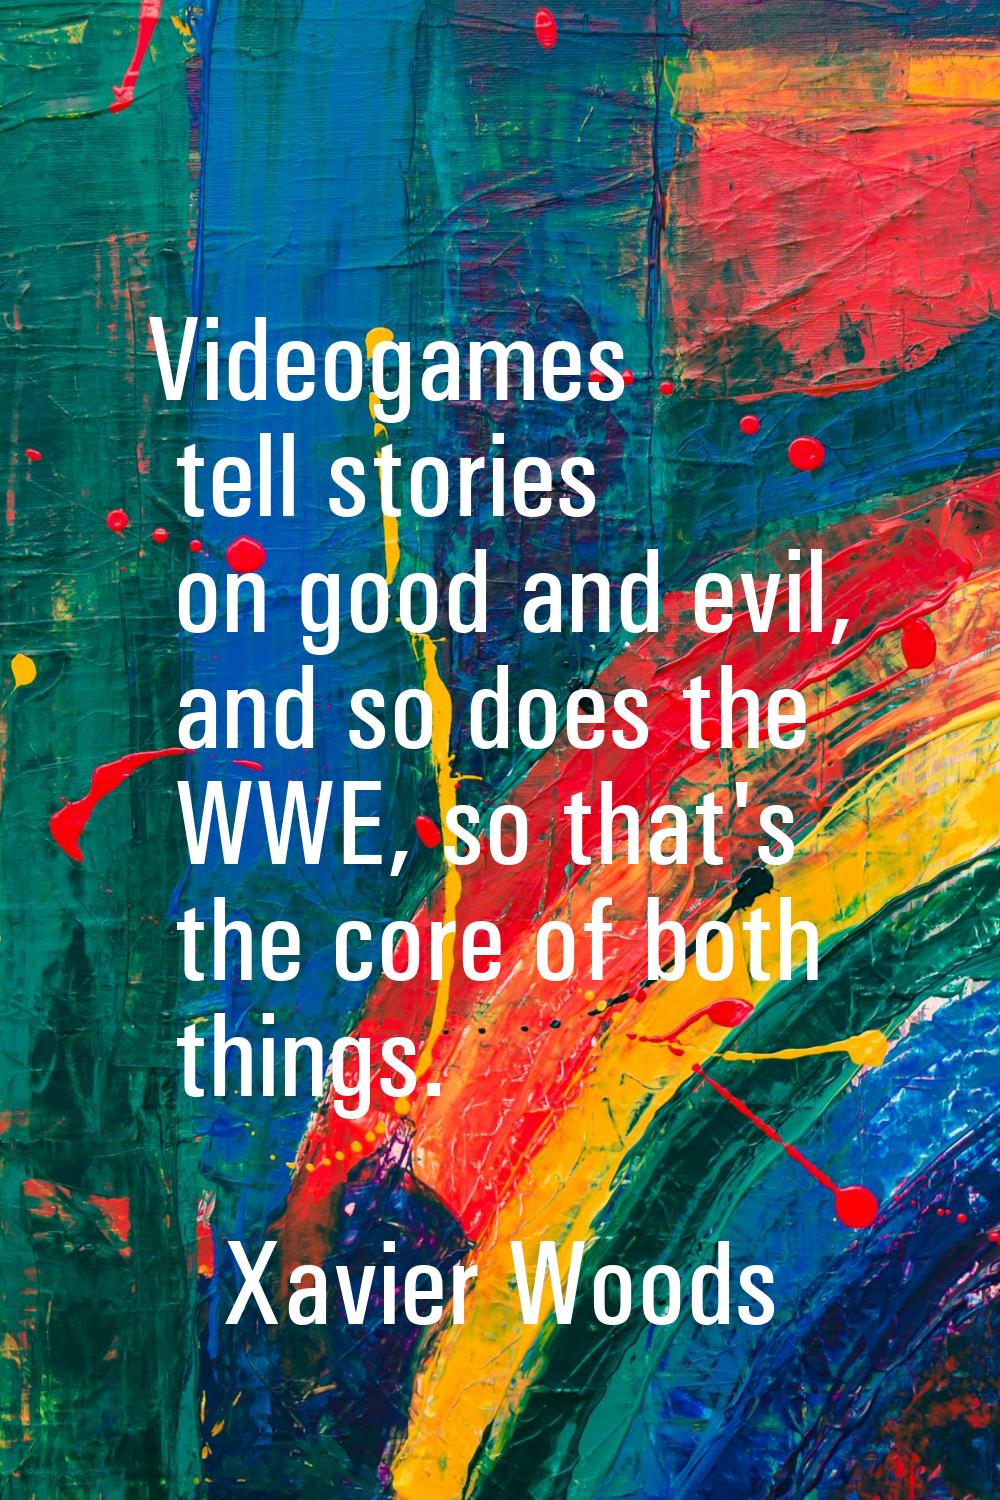 Videogames tell stories on good and evil, and so does the WWE, so that's the core of both things.